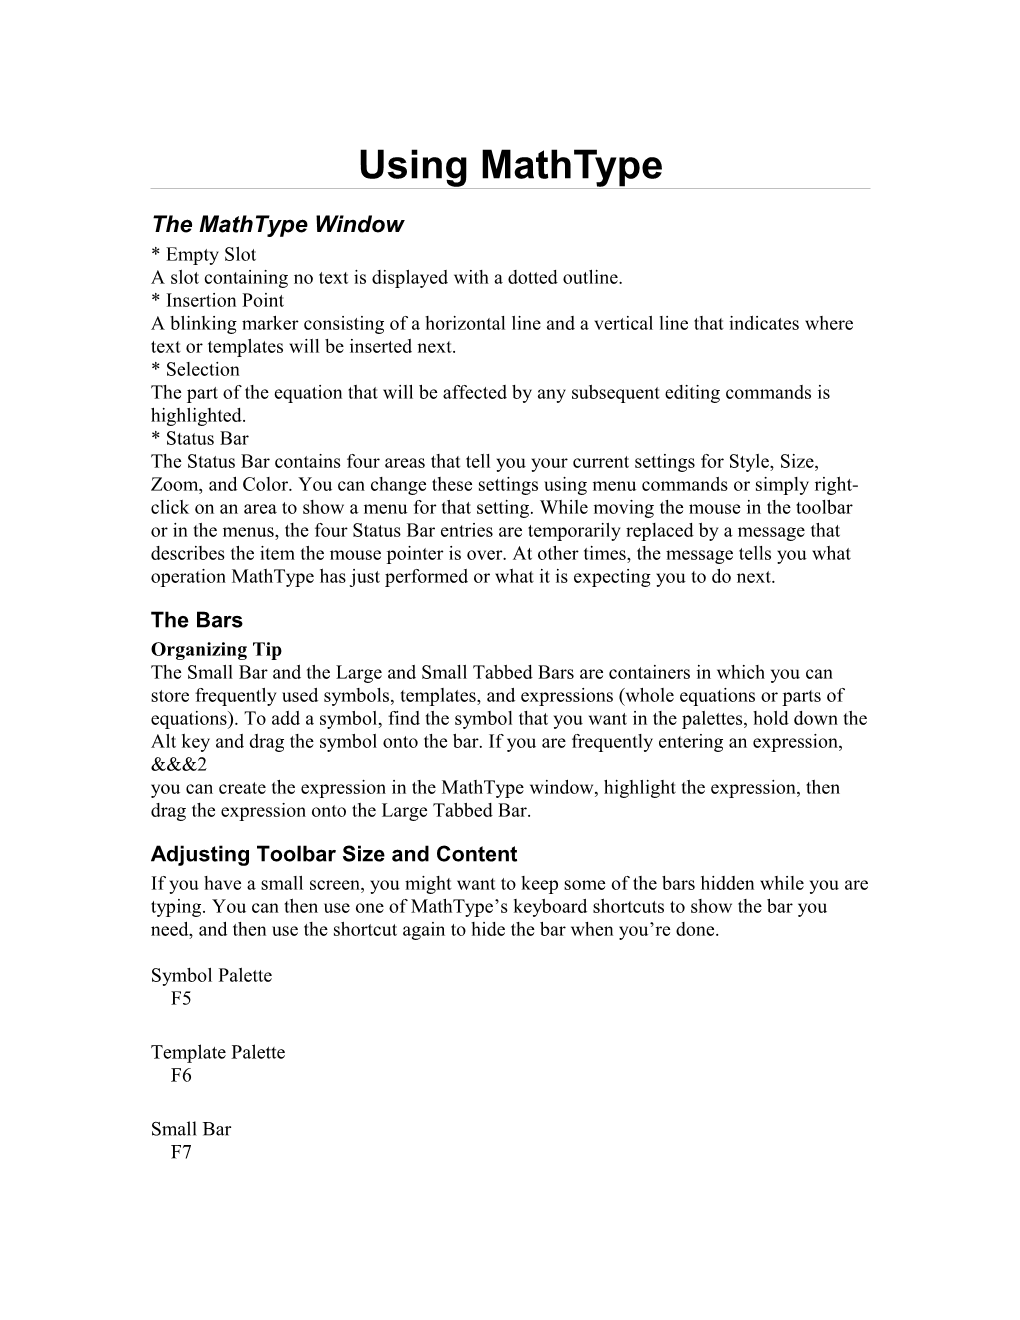 Working with Mathtype and Scientific Notebook